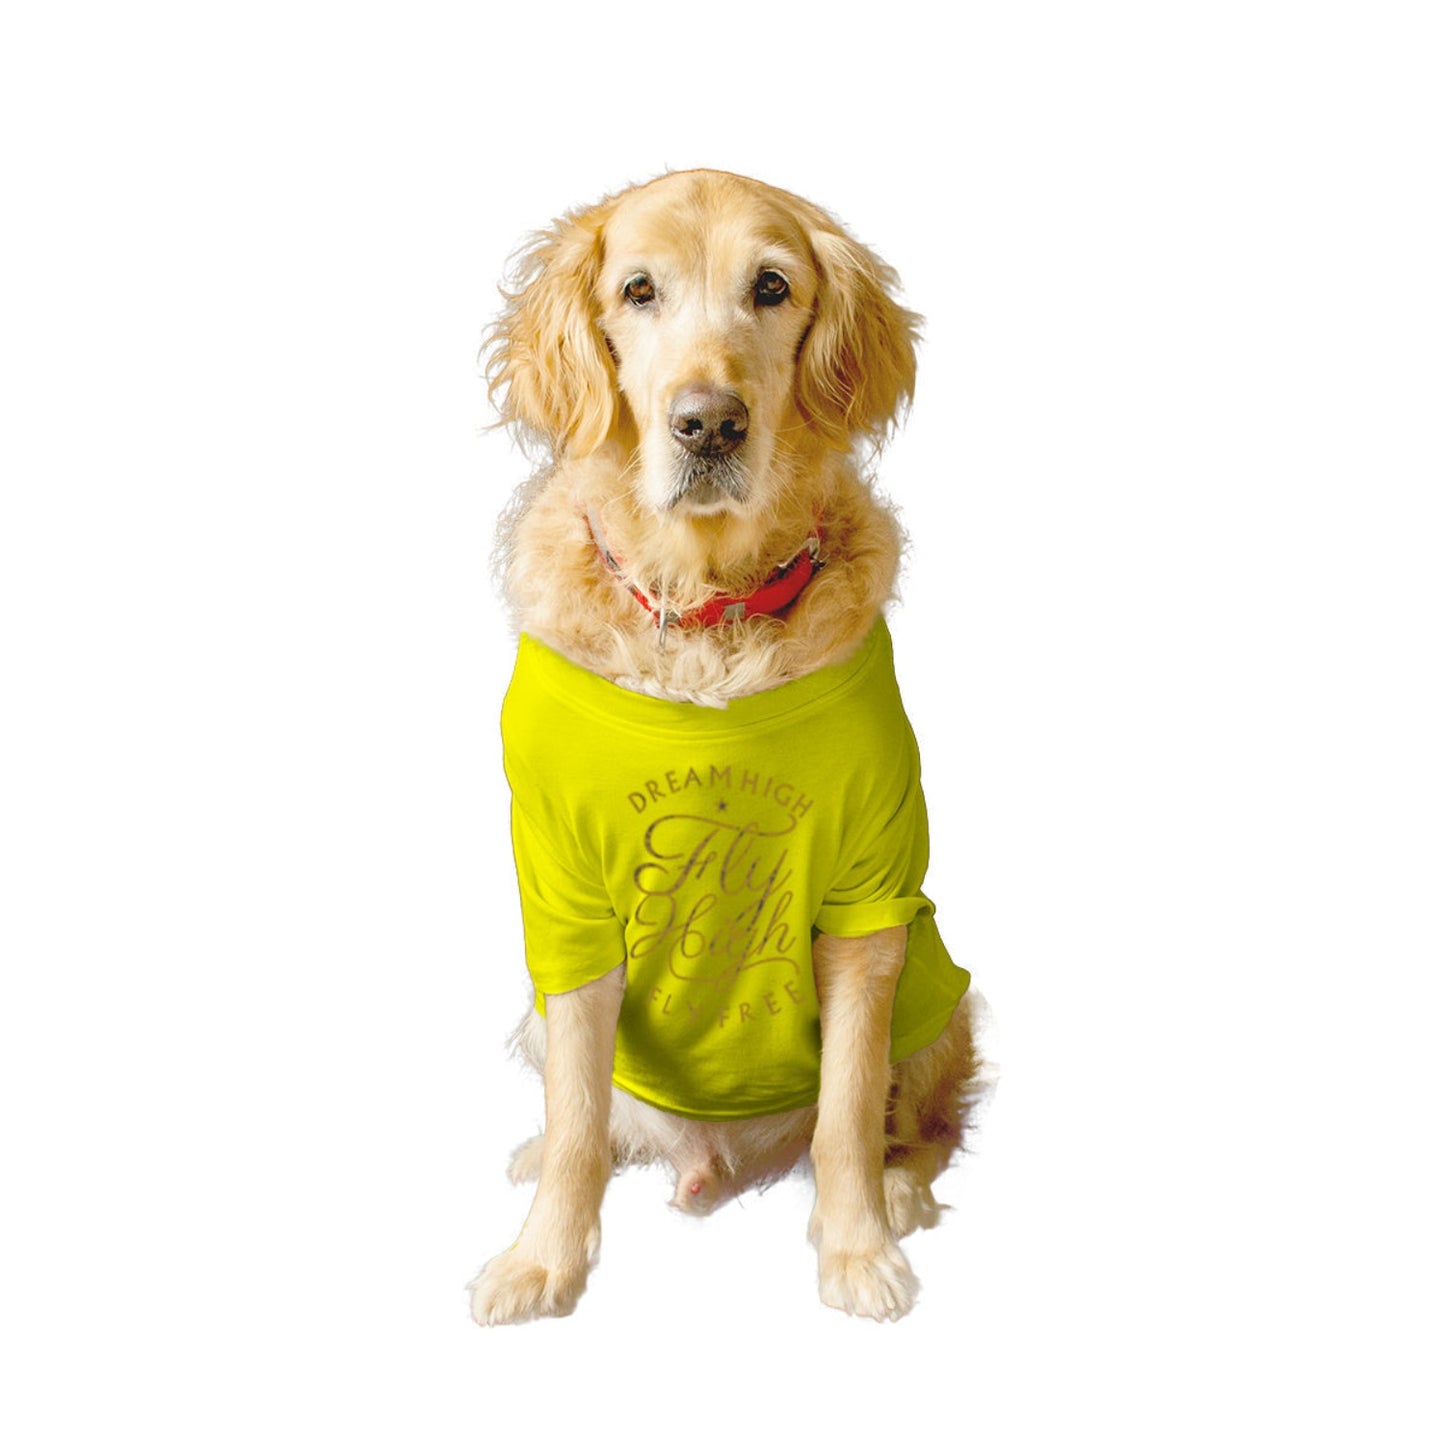 Ruse XX-Small (Chihuahuas, Papillons) / Yellow Ruse Basic Crew Neck "FLY HIGH" Printed Half Sleeves Dog Tee